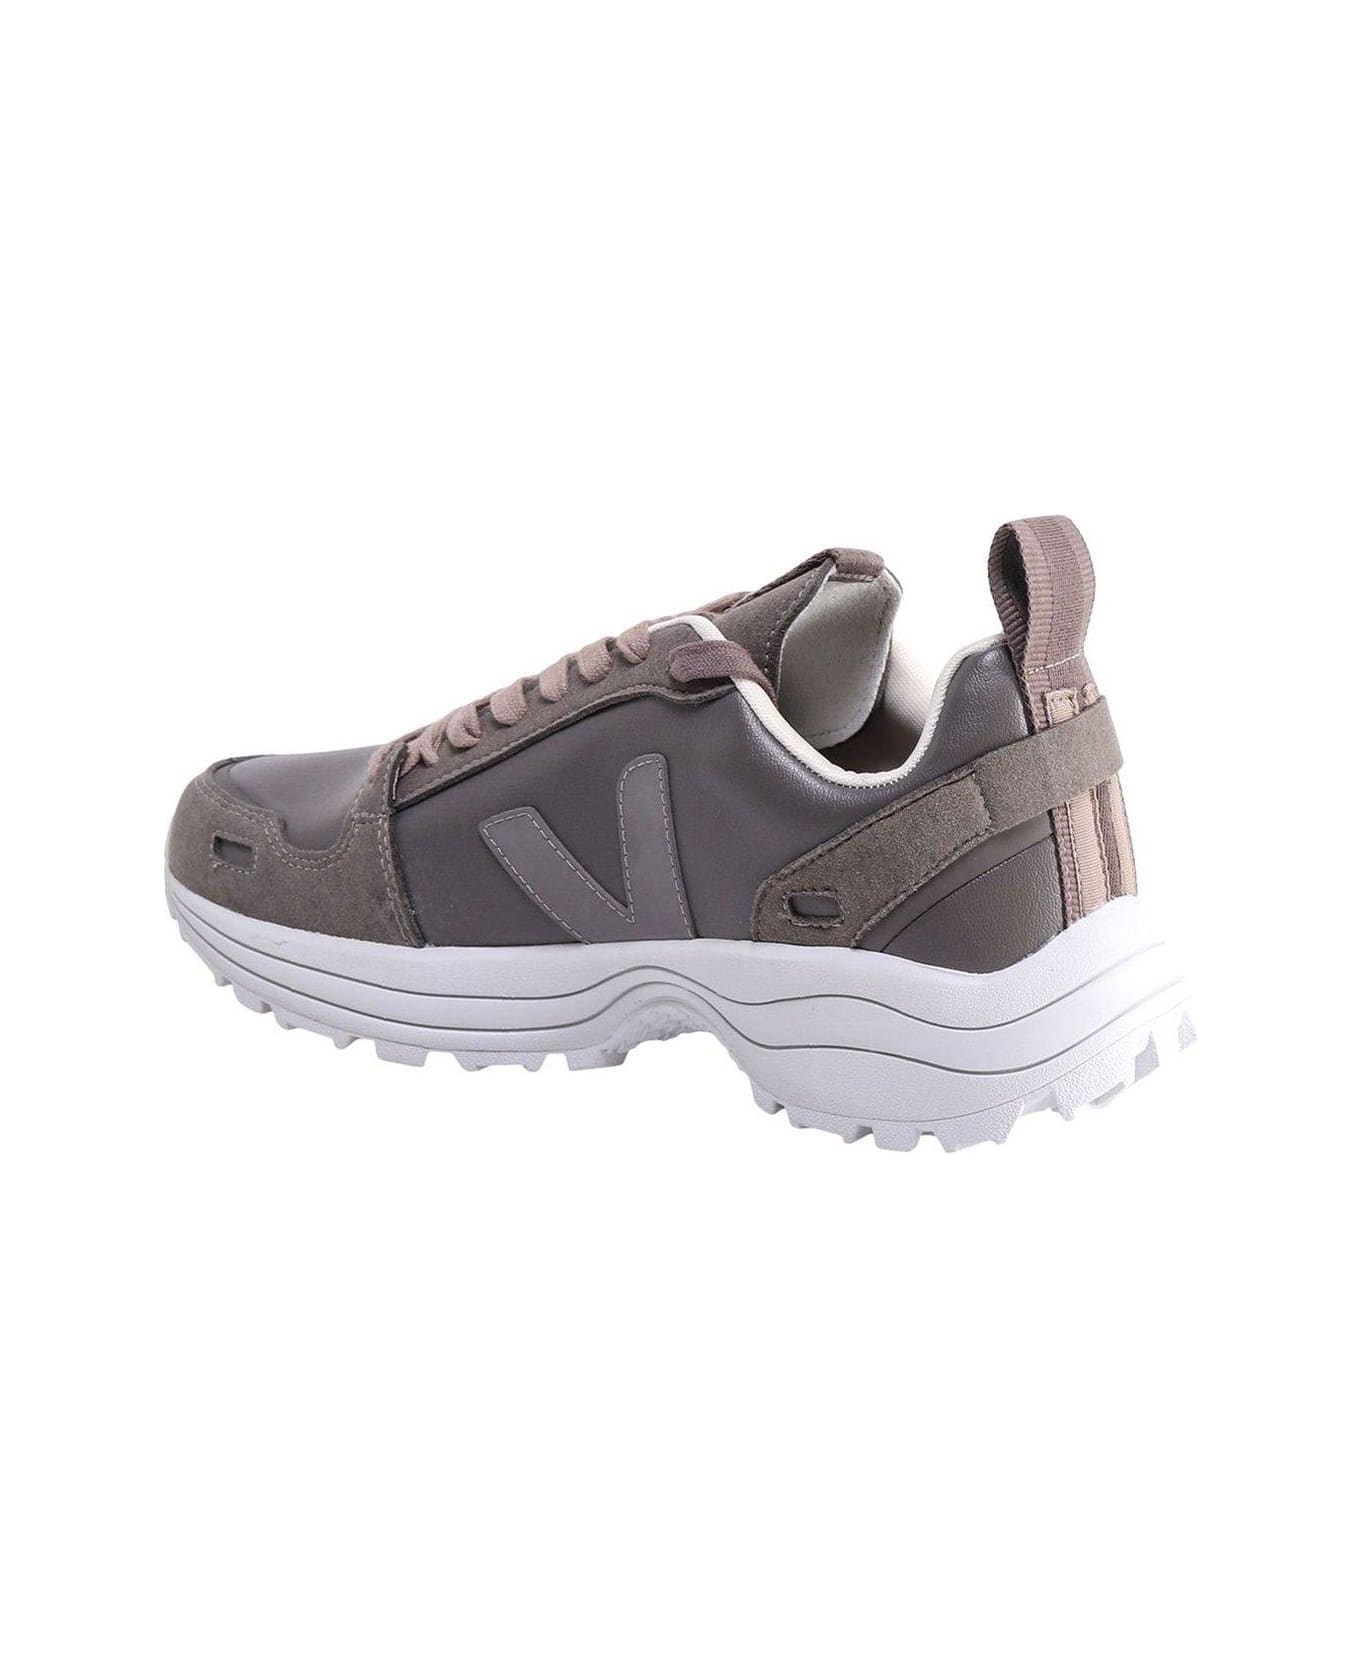 Rick Owens Hiking Style Lace-up Sneakers - Grey